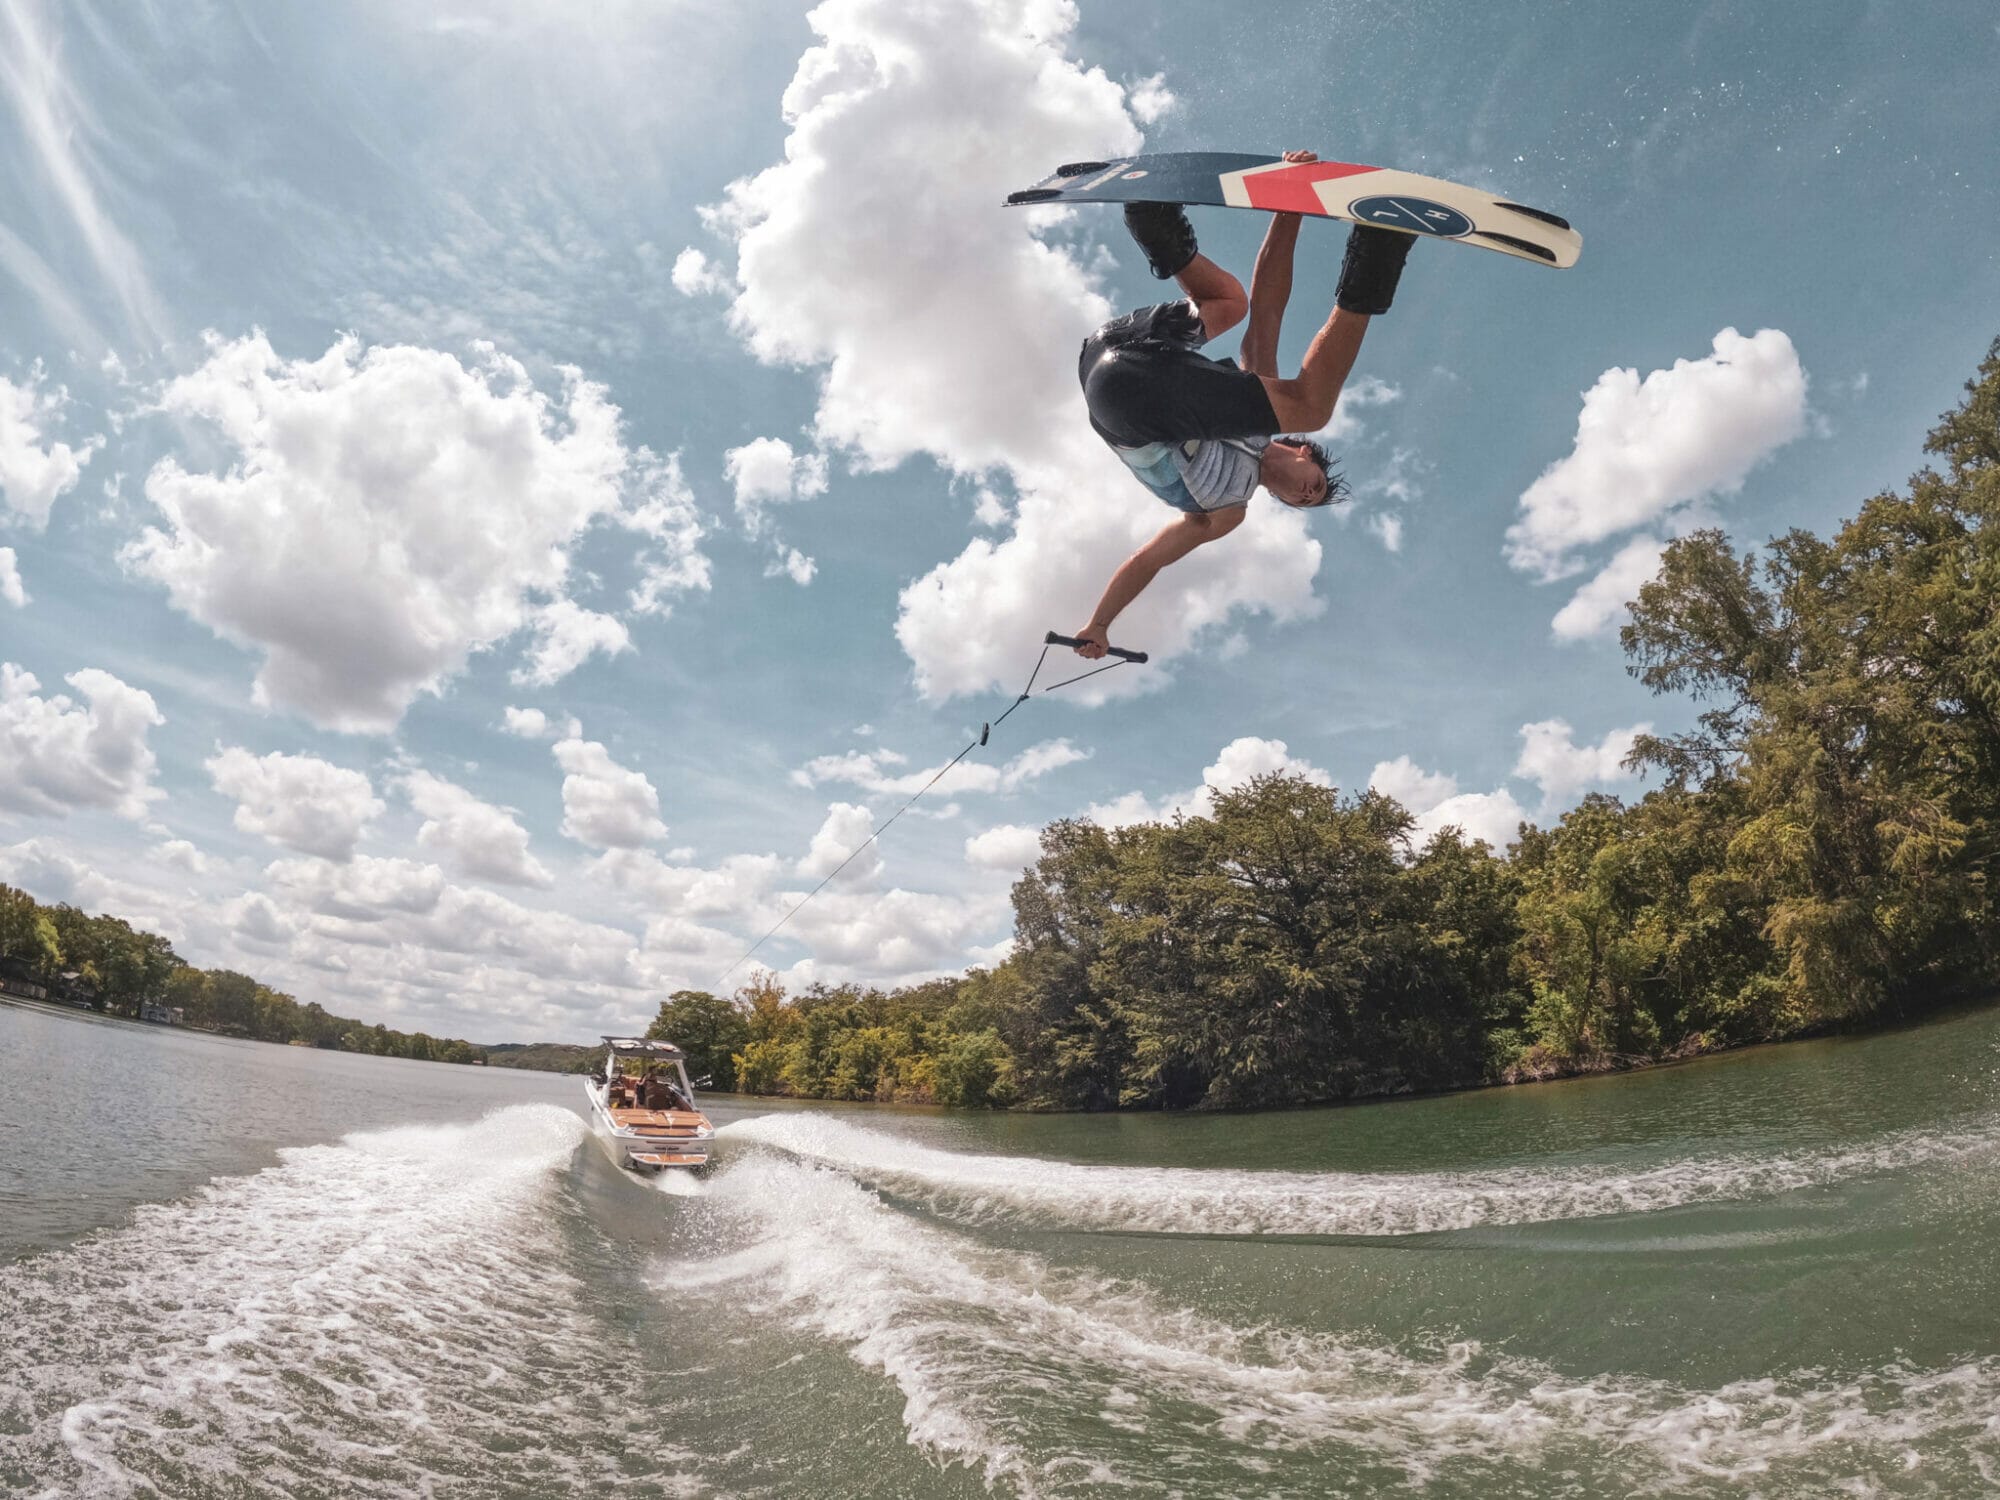 A man performing a trick on a wakeboard behind a wakeboat.